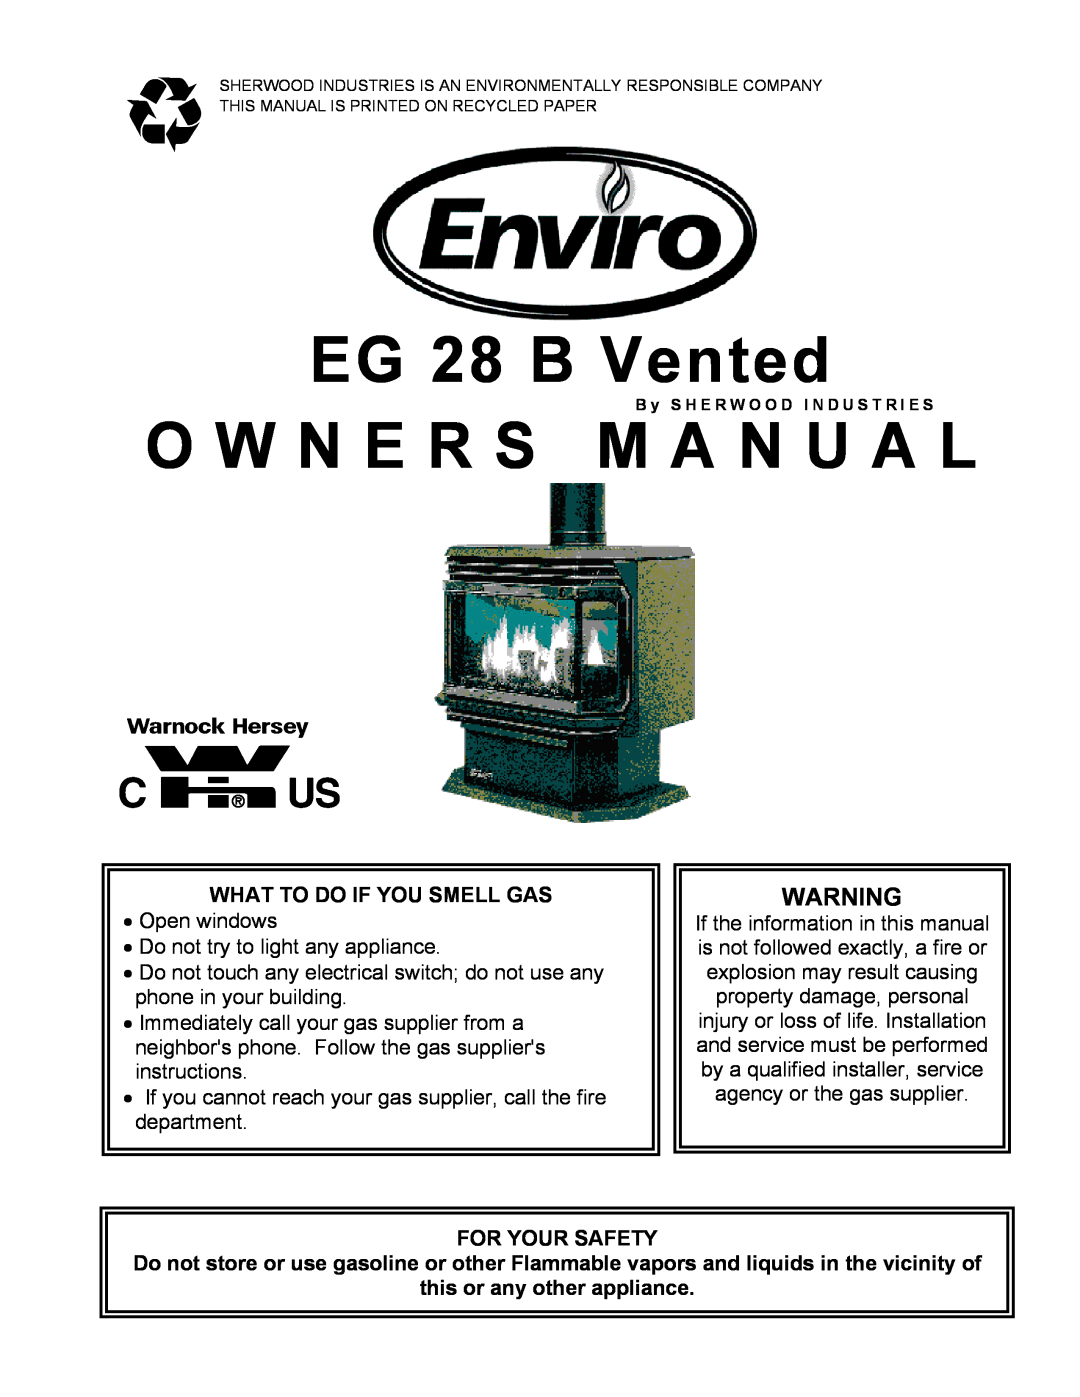 Enviro owner manual What To Do If You Smell Gas, For Your Safety, this or any other appliance, EG 28 B Vented 